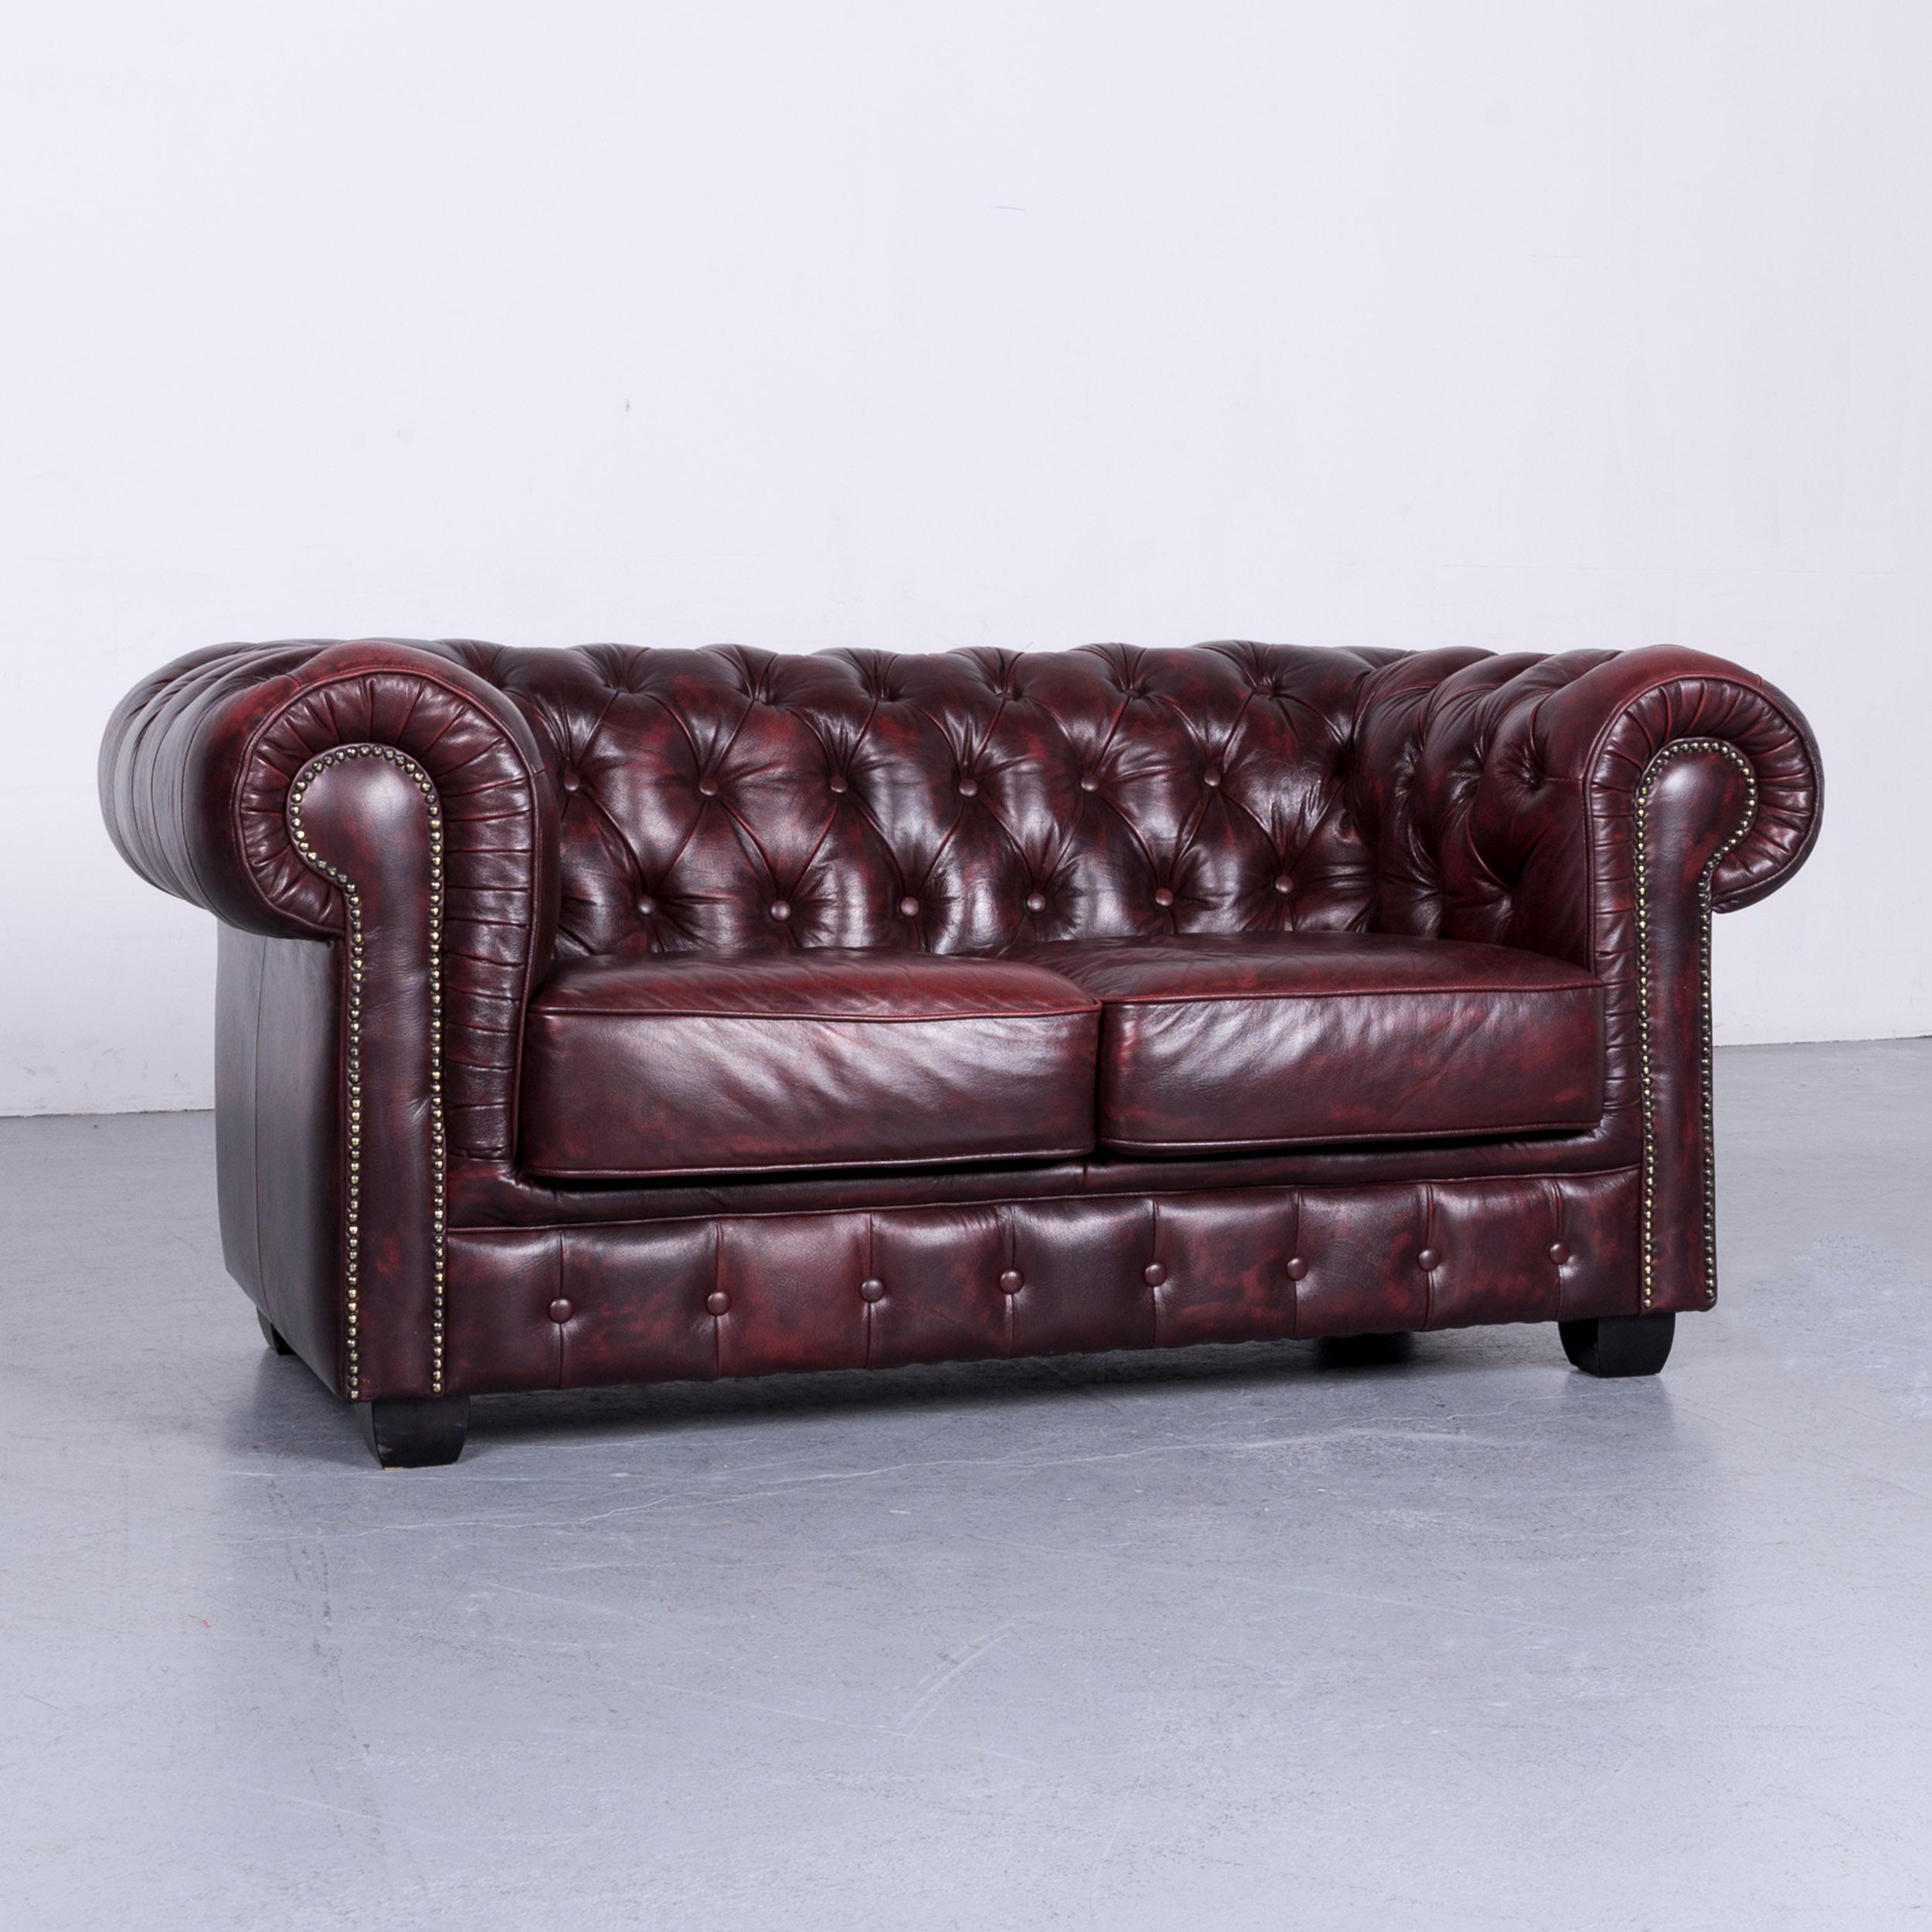 We bring to you an Chesterfield leather sofa brown two-seat couch vintage retro.























      